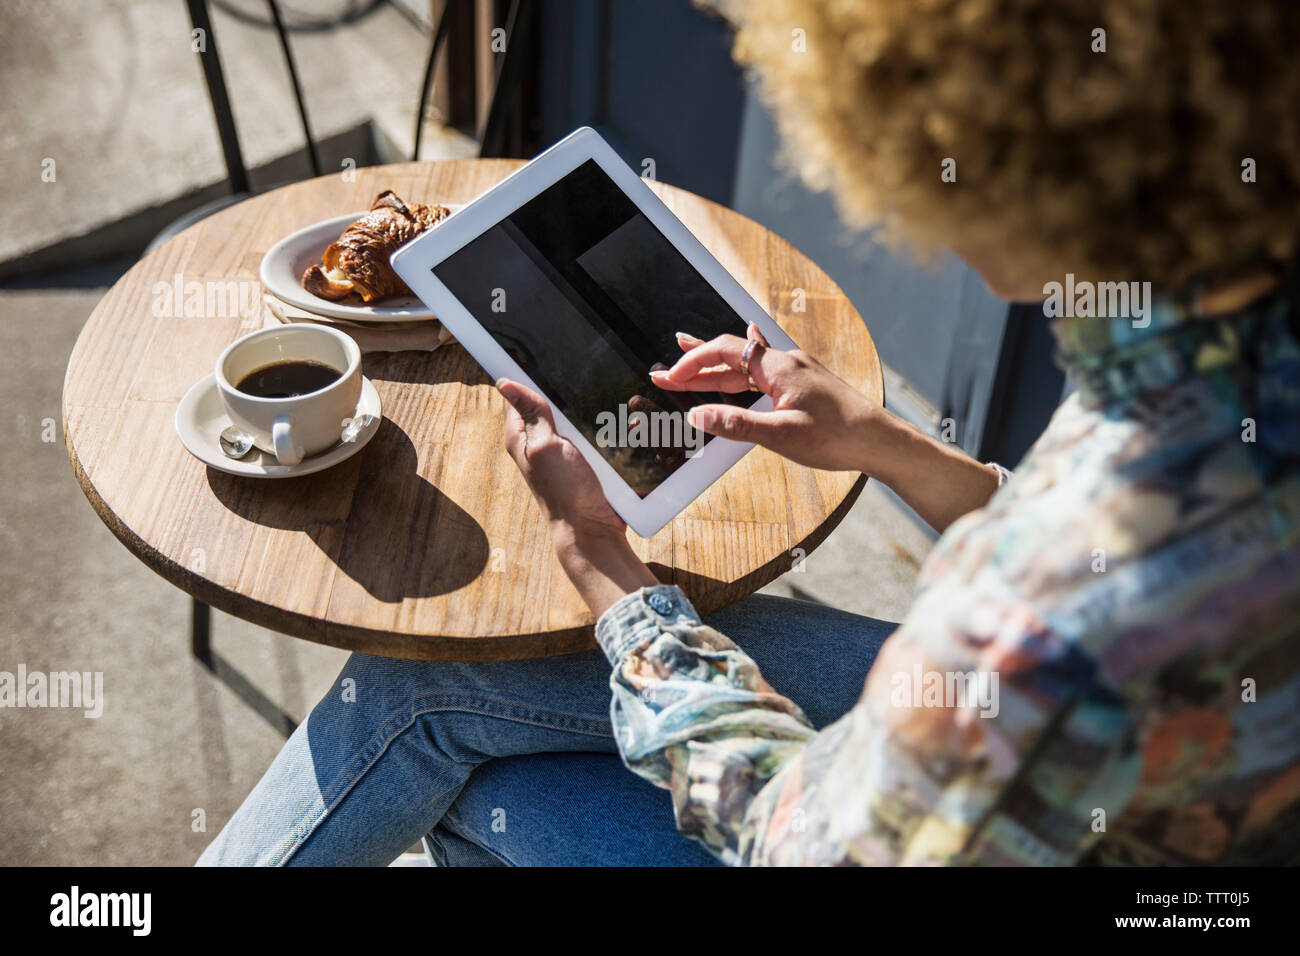 High angle view of woman using digital tablet while sitting at sidewalk cafe Banque D'Images